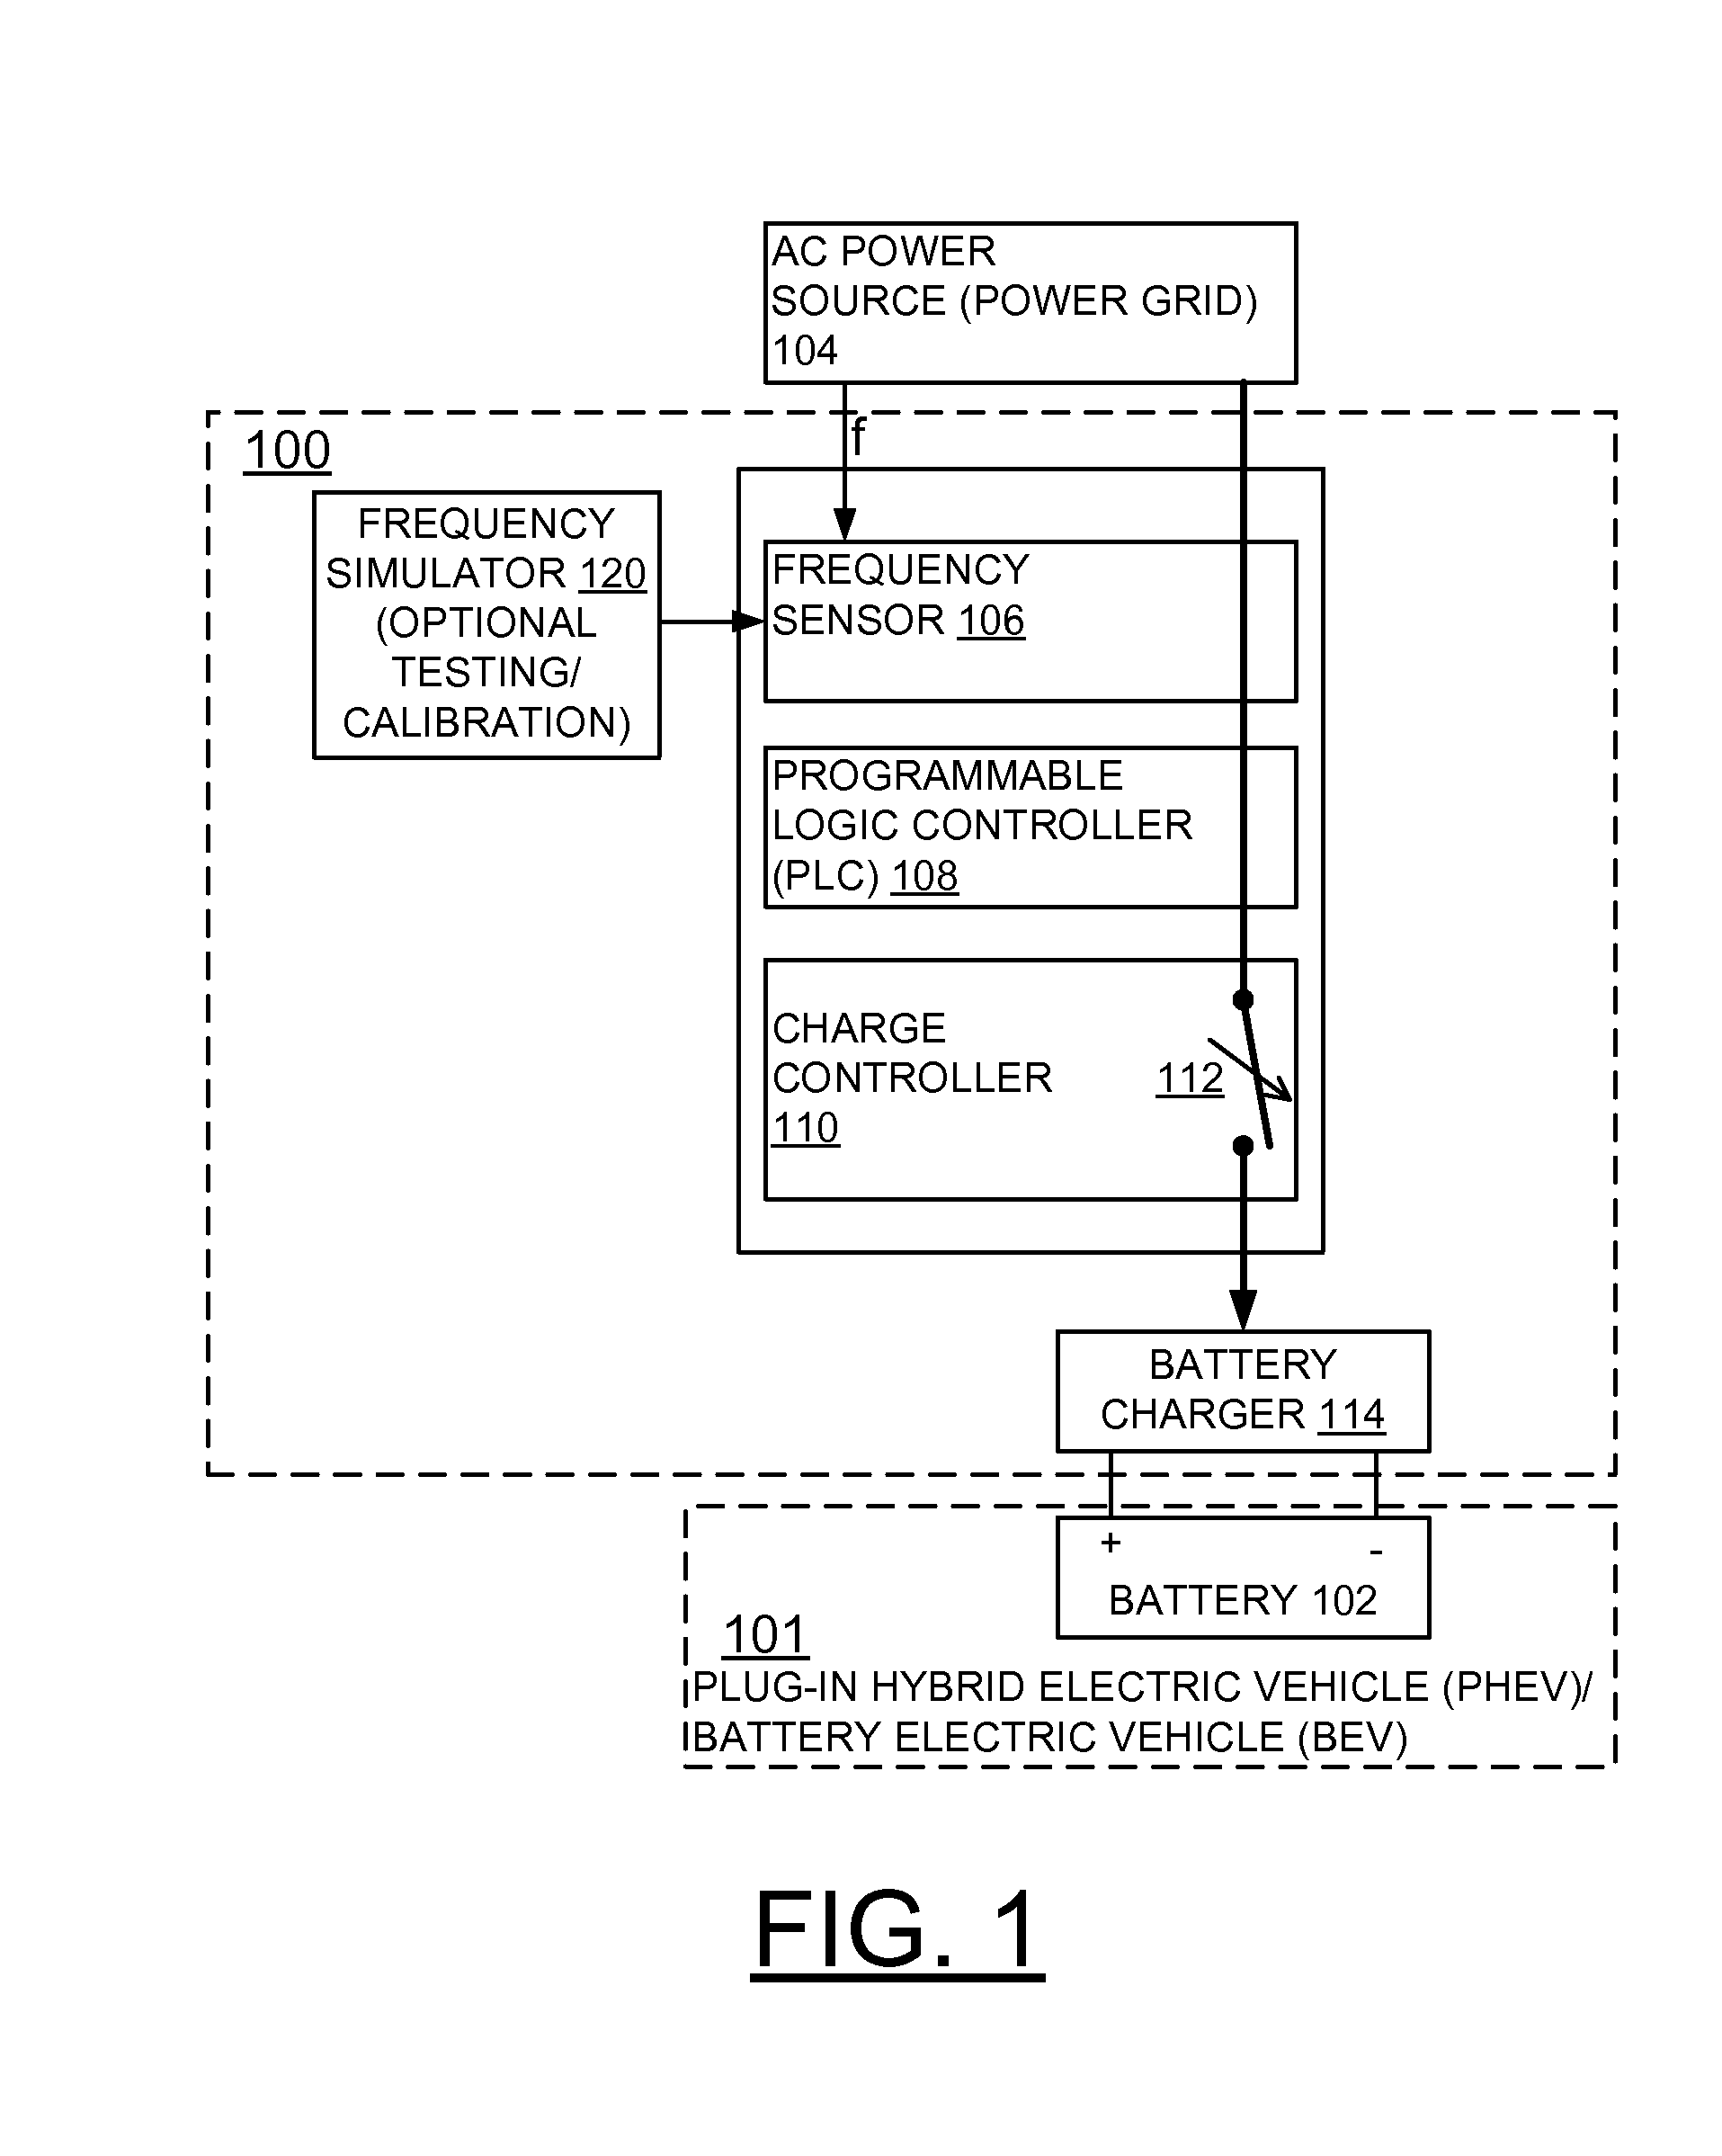 Frequency based electric vehicle charge controller system and method for implementing demand response and regulation services to power grid using frequency detection